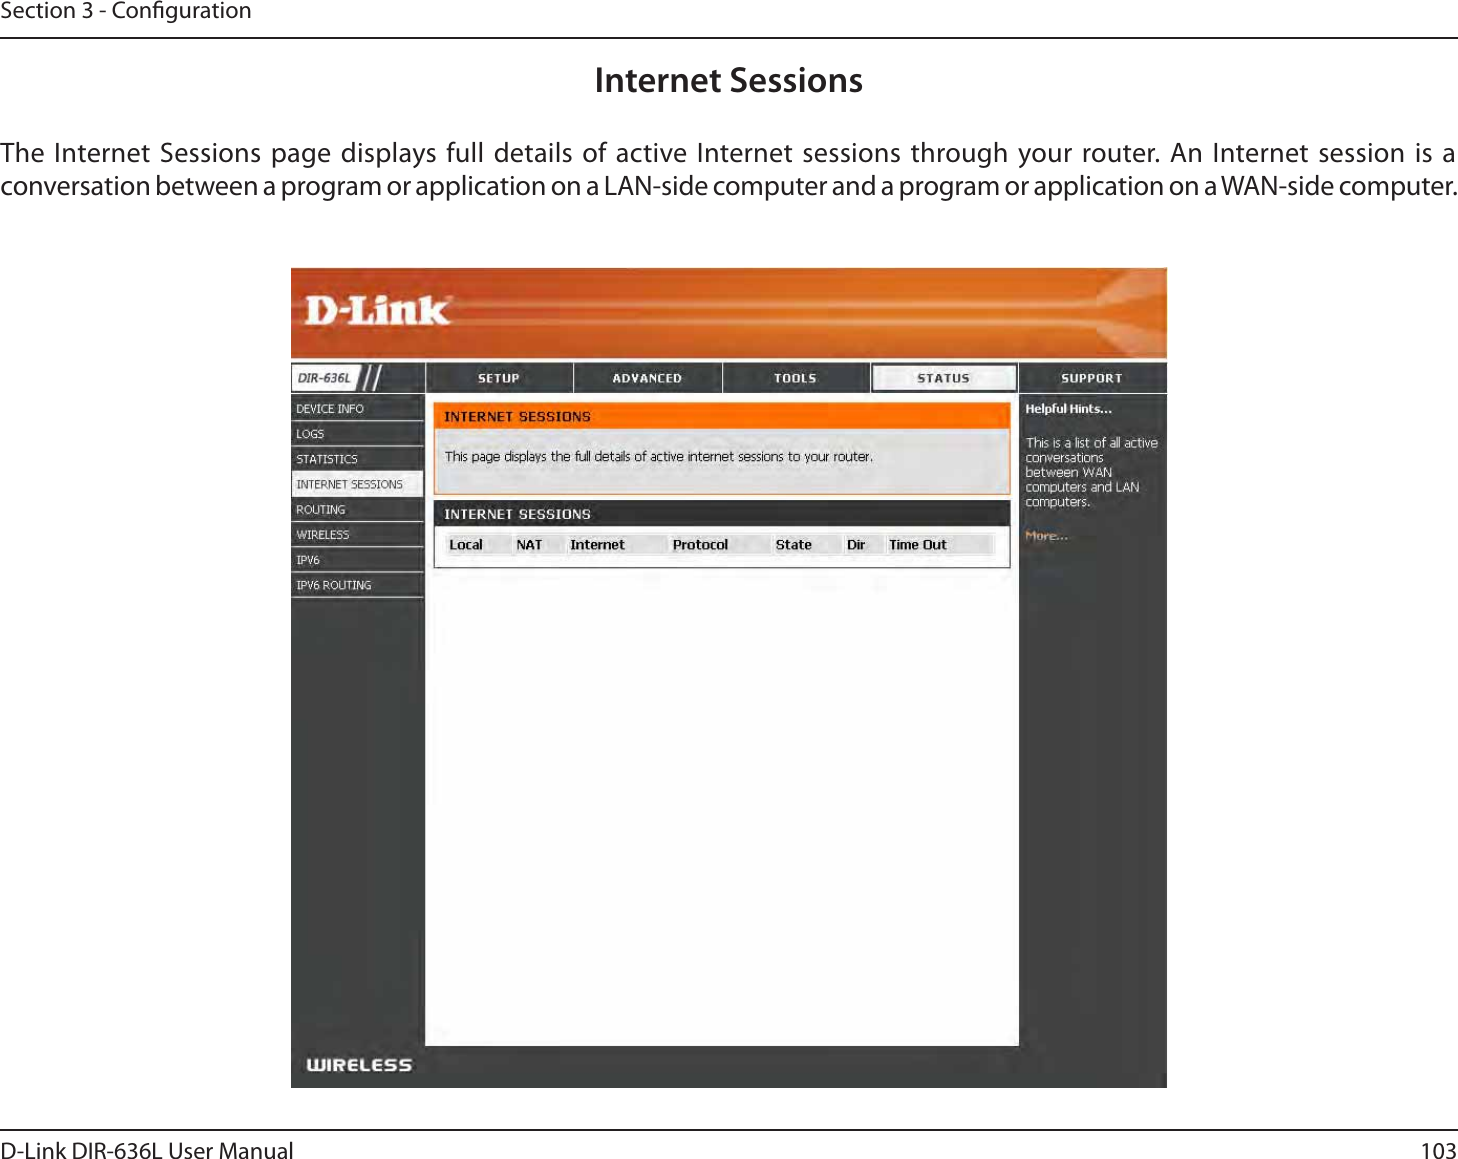 103D-Link DIR-636L User ManualSection 3 - CongurationInternet SessionsThe Internet Sessions page displays full details of active Internet sessions through your router. An Internet session is a conversation between a program or application on a LAN-side computer and a program or application on a WAN-side computer. 